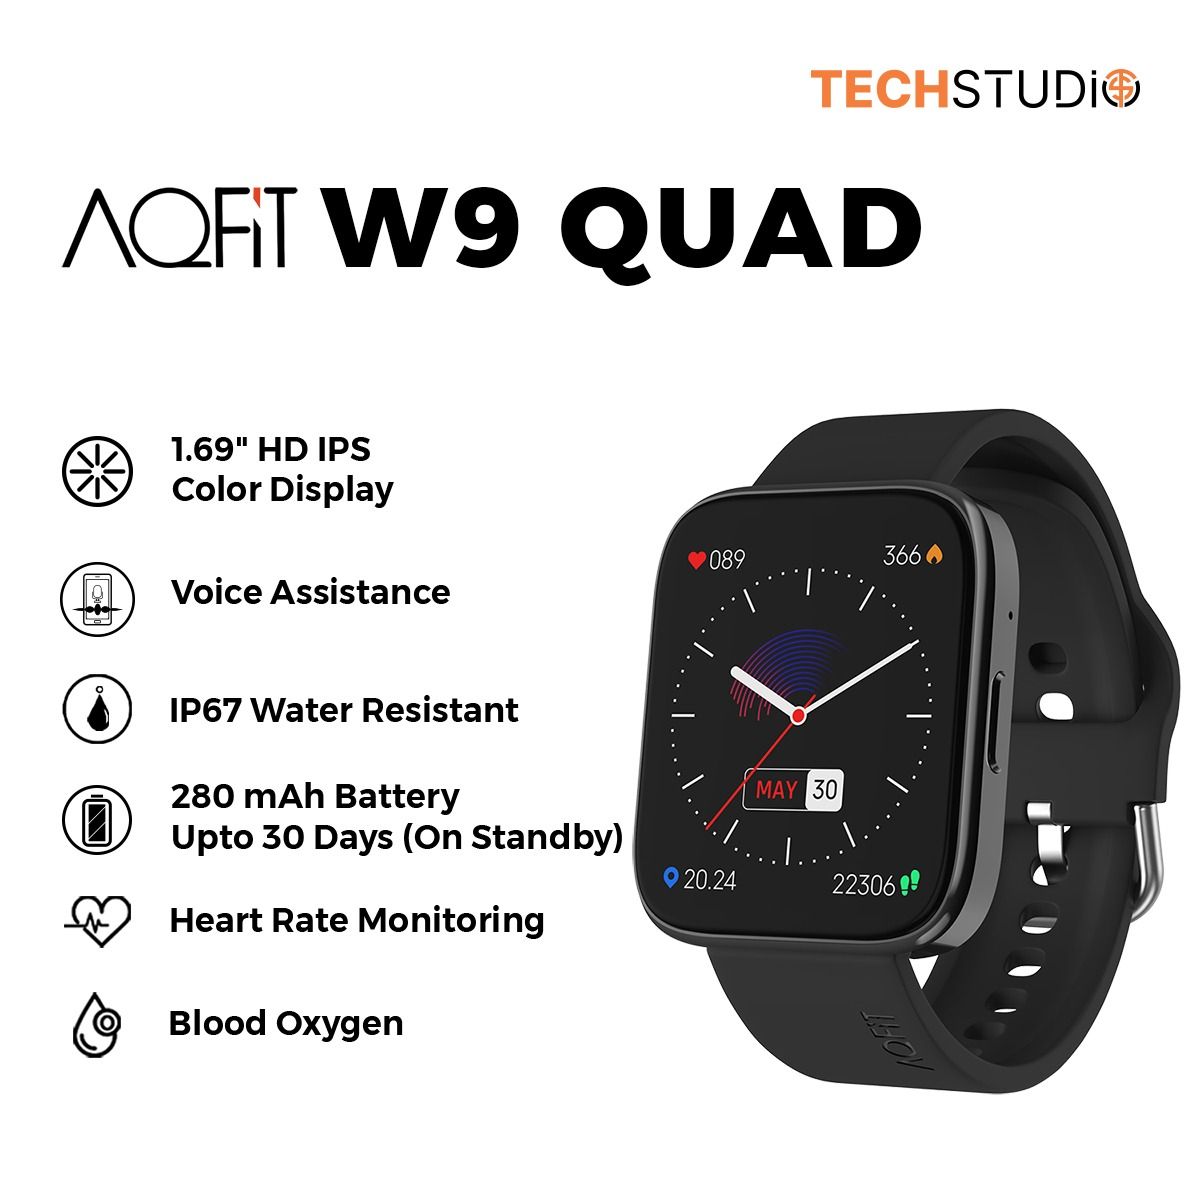 Buy Aqfit W9 Quad Gold Bluetooth Fitness Tracker Smartwatch Online At Best  Price On Moglix